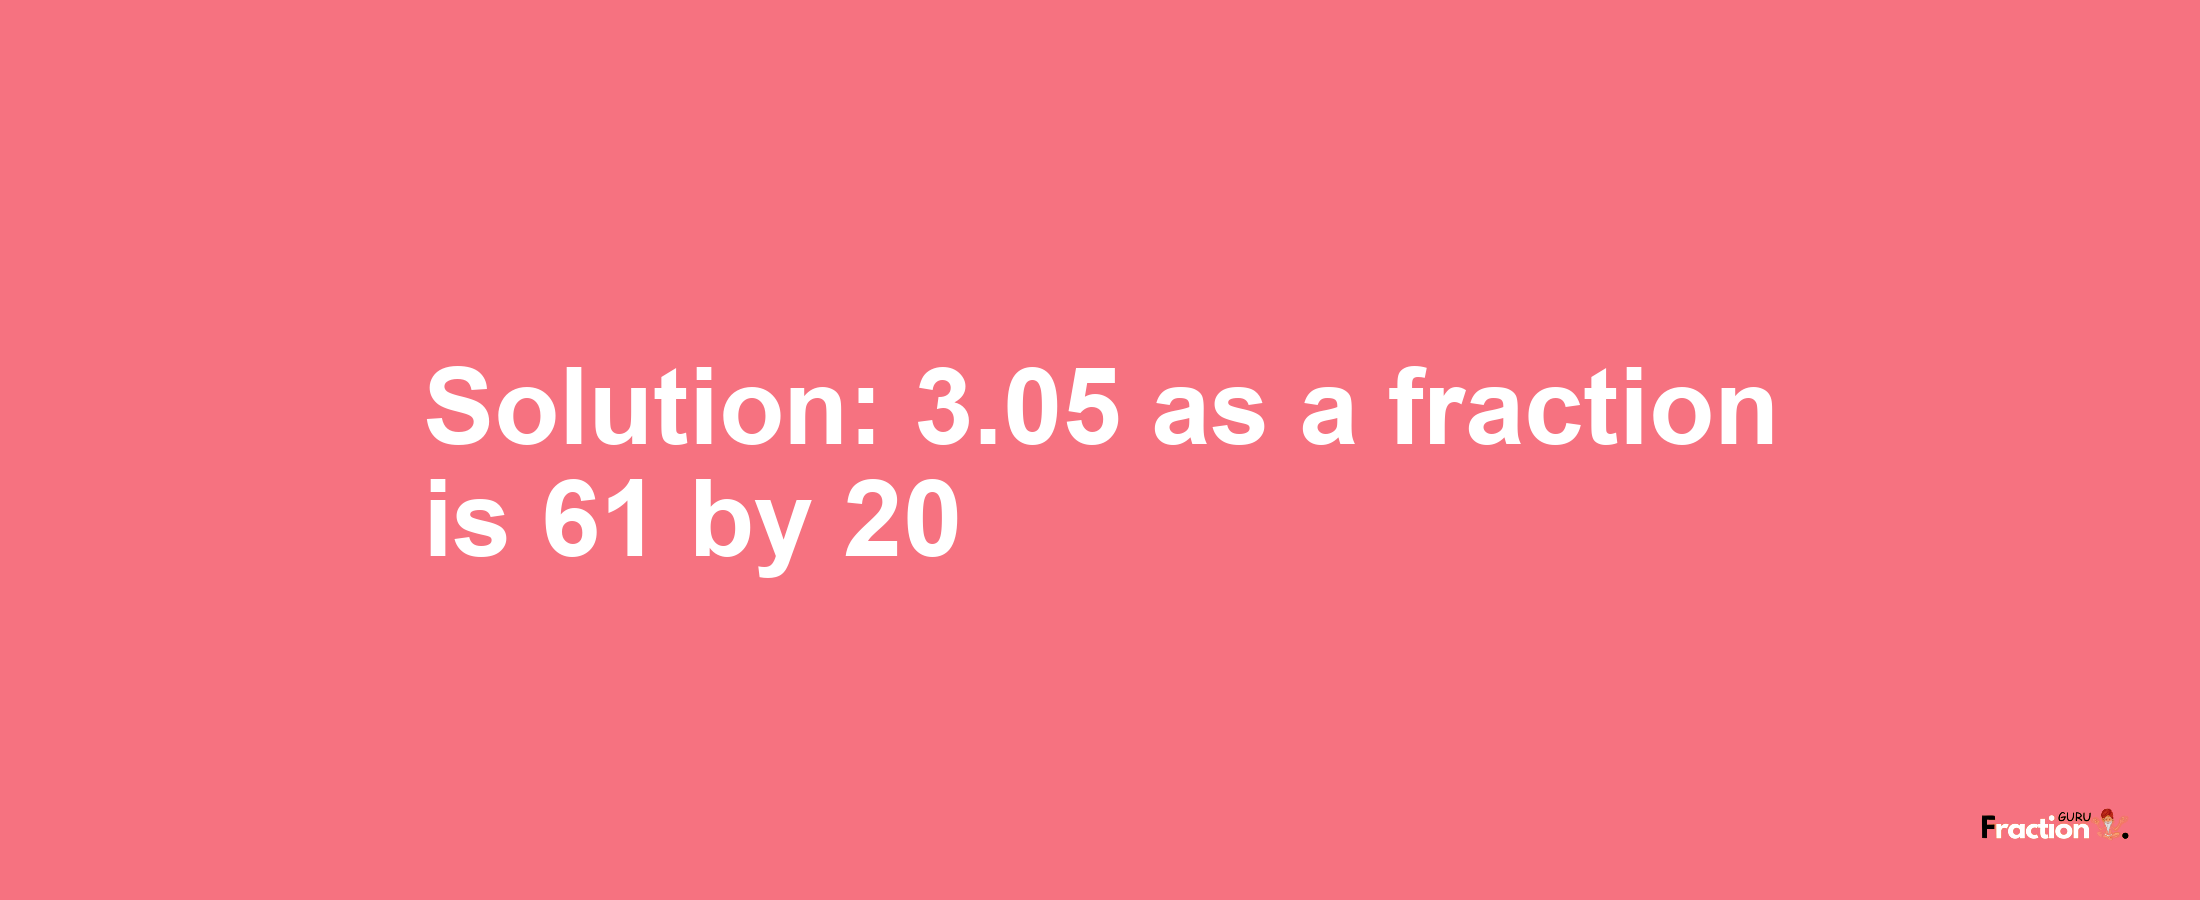 Solution:3.05 as a fraction is 61/20